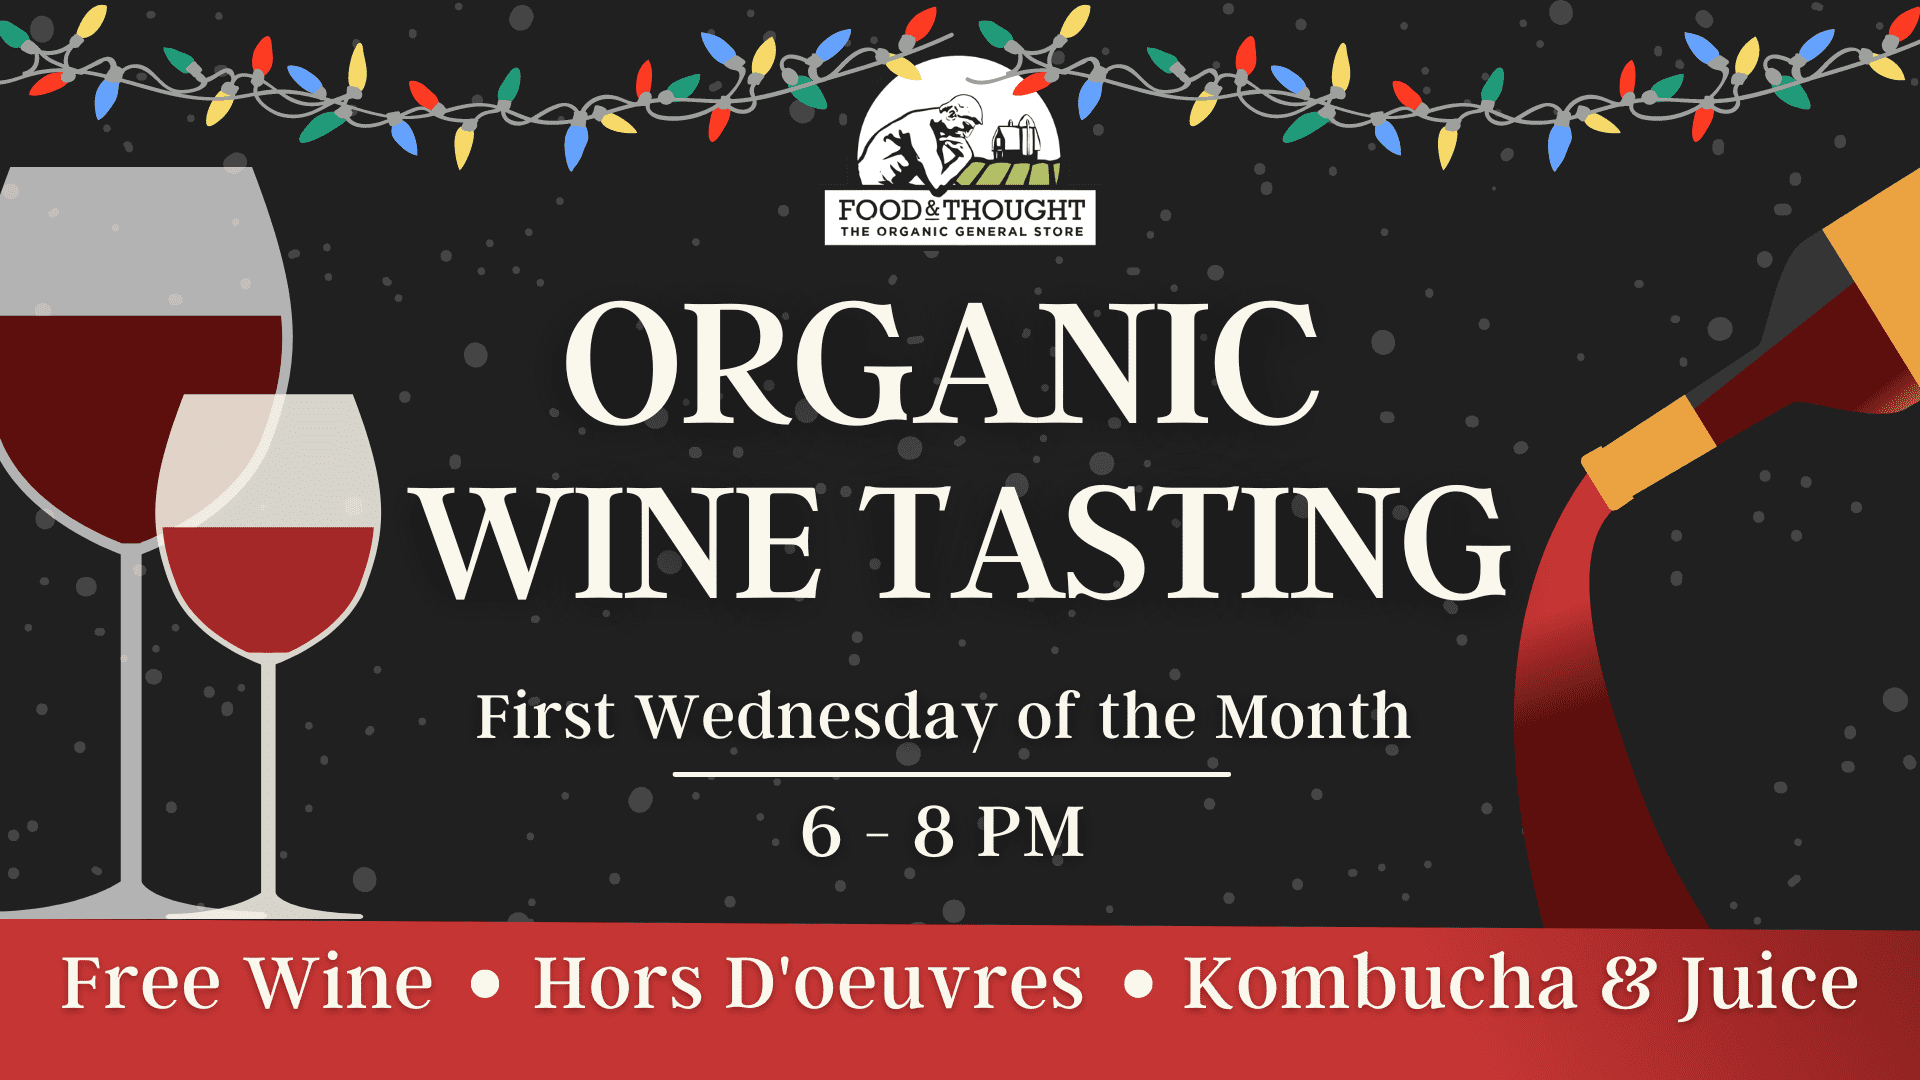 Organic Wine Tasting on the First Wednesday of the Month from 6-8 PM. Free wine, Appetizers and kombucha and juice